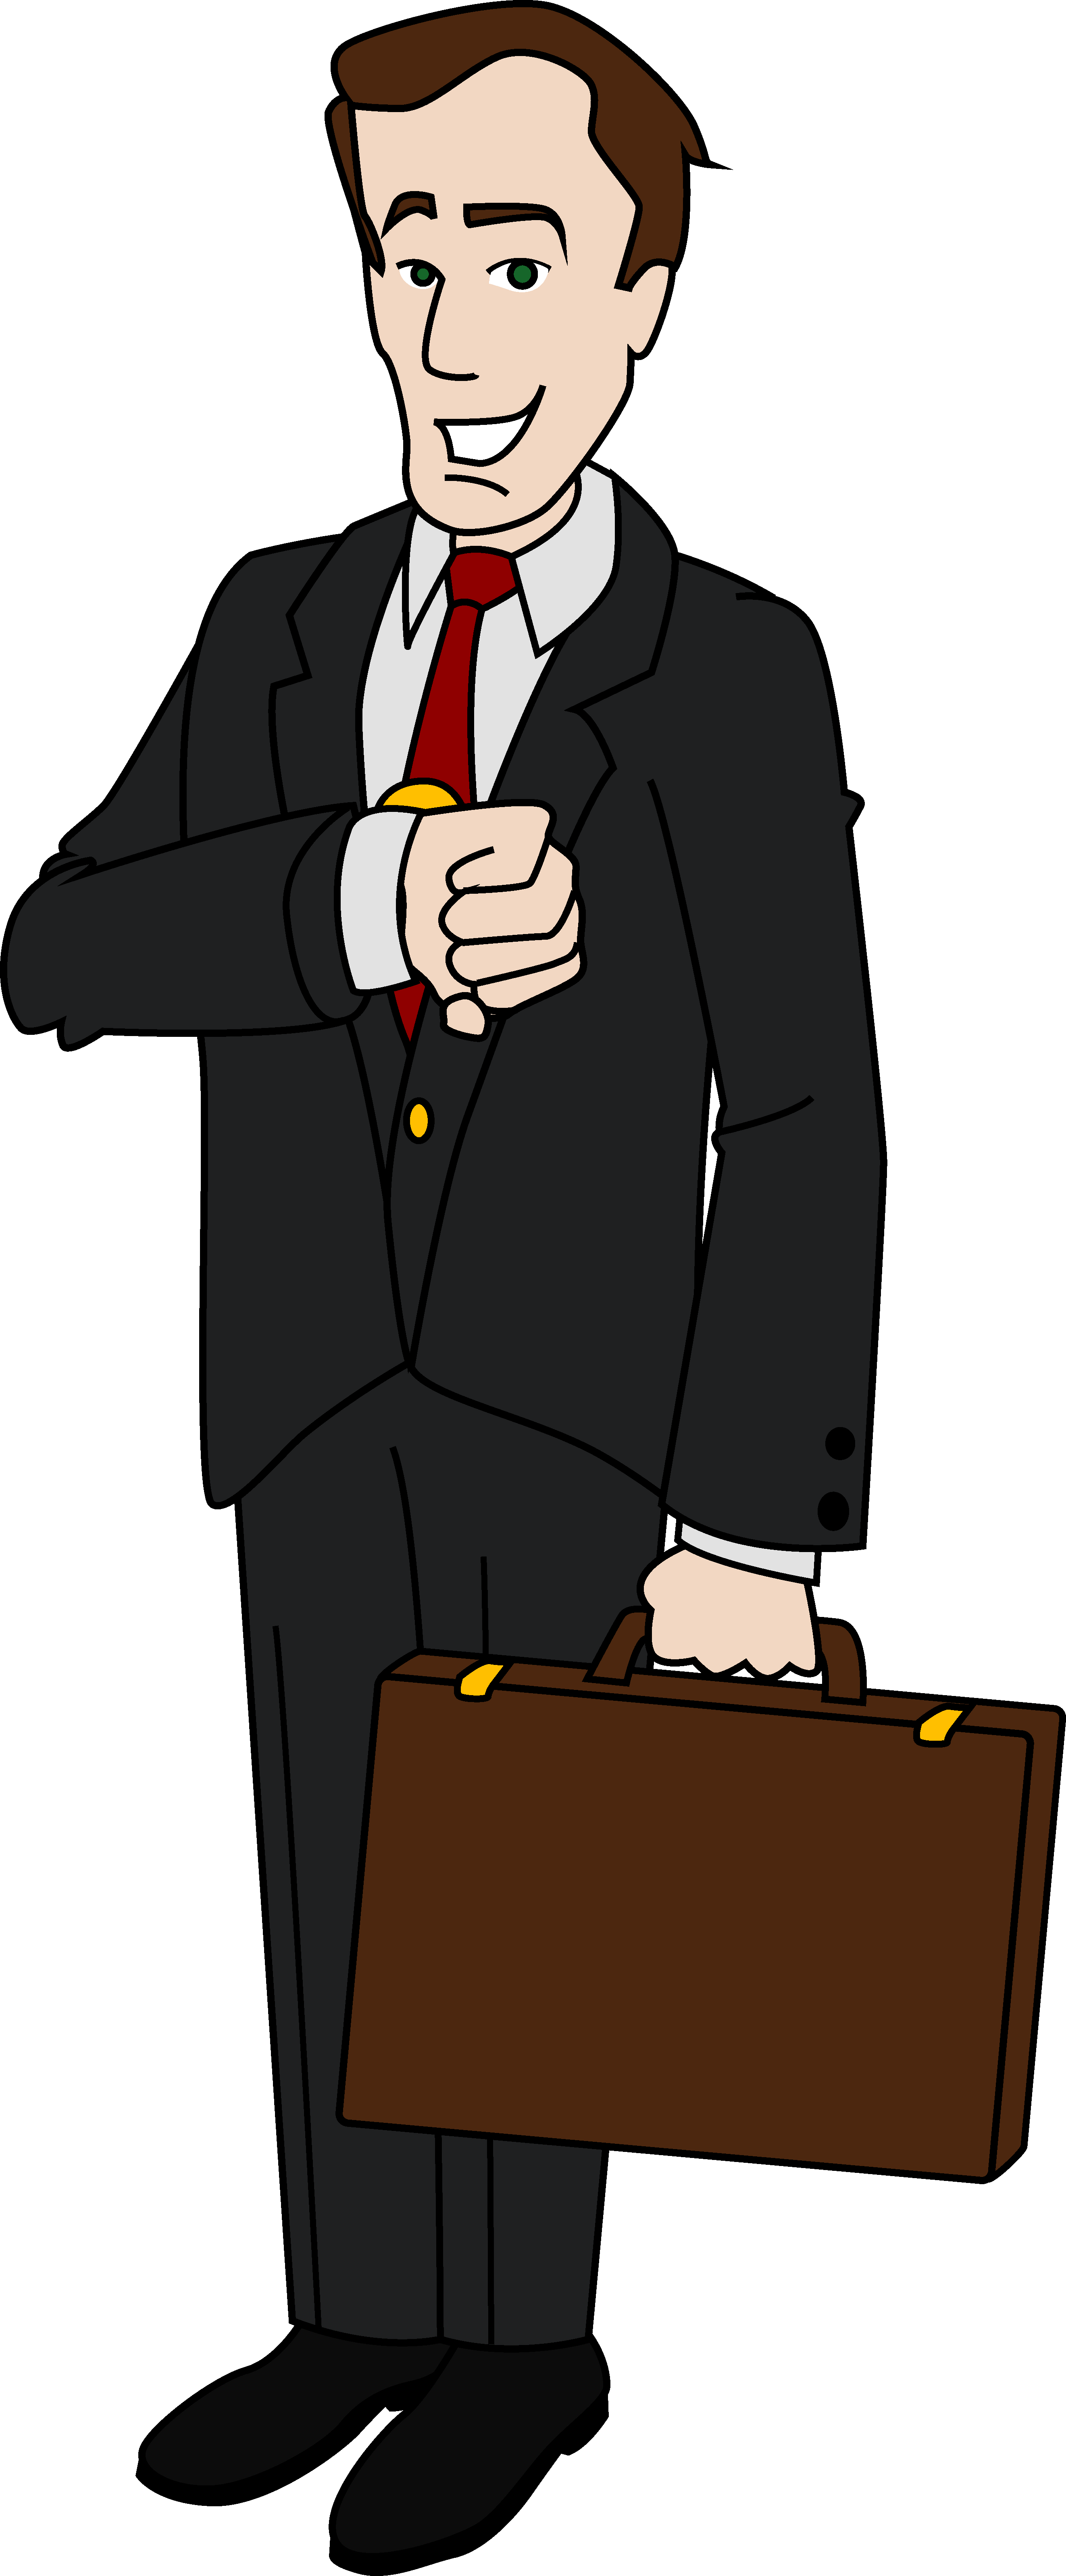 Businessman free panda images. Working clipart business person